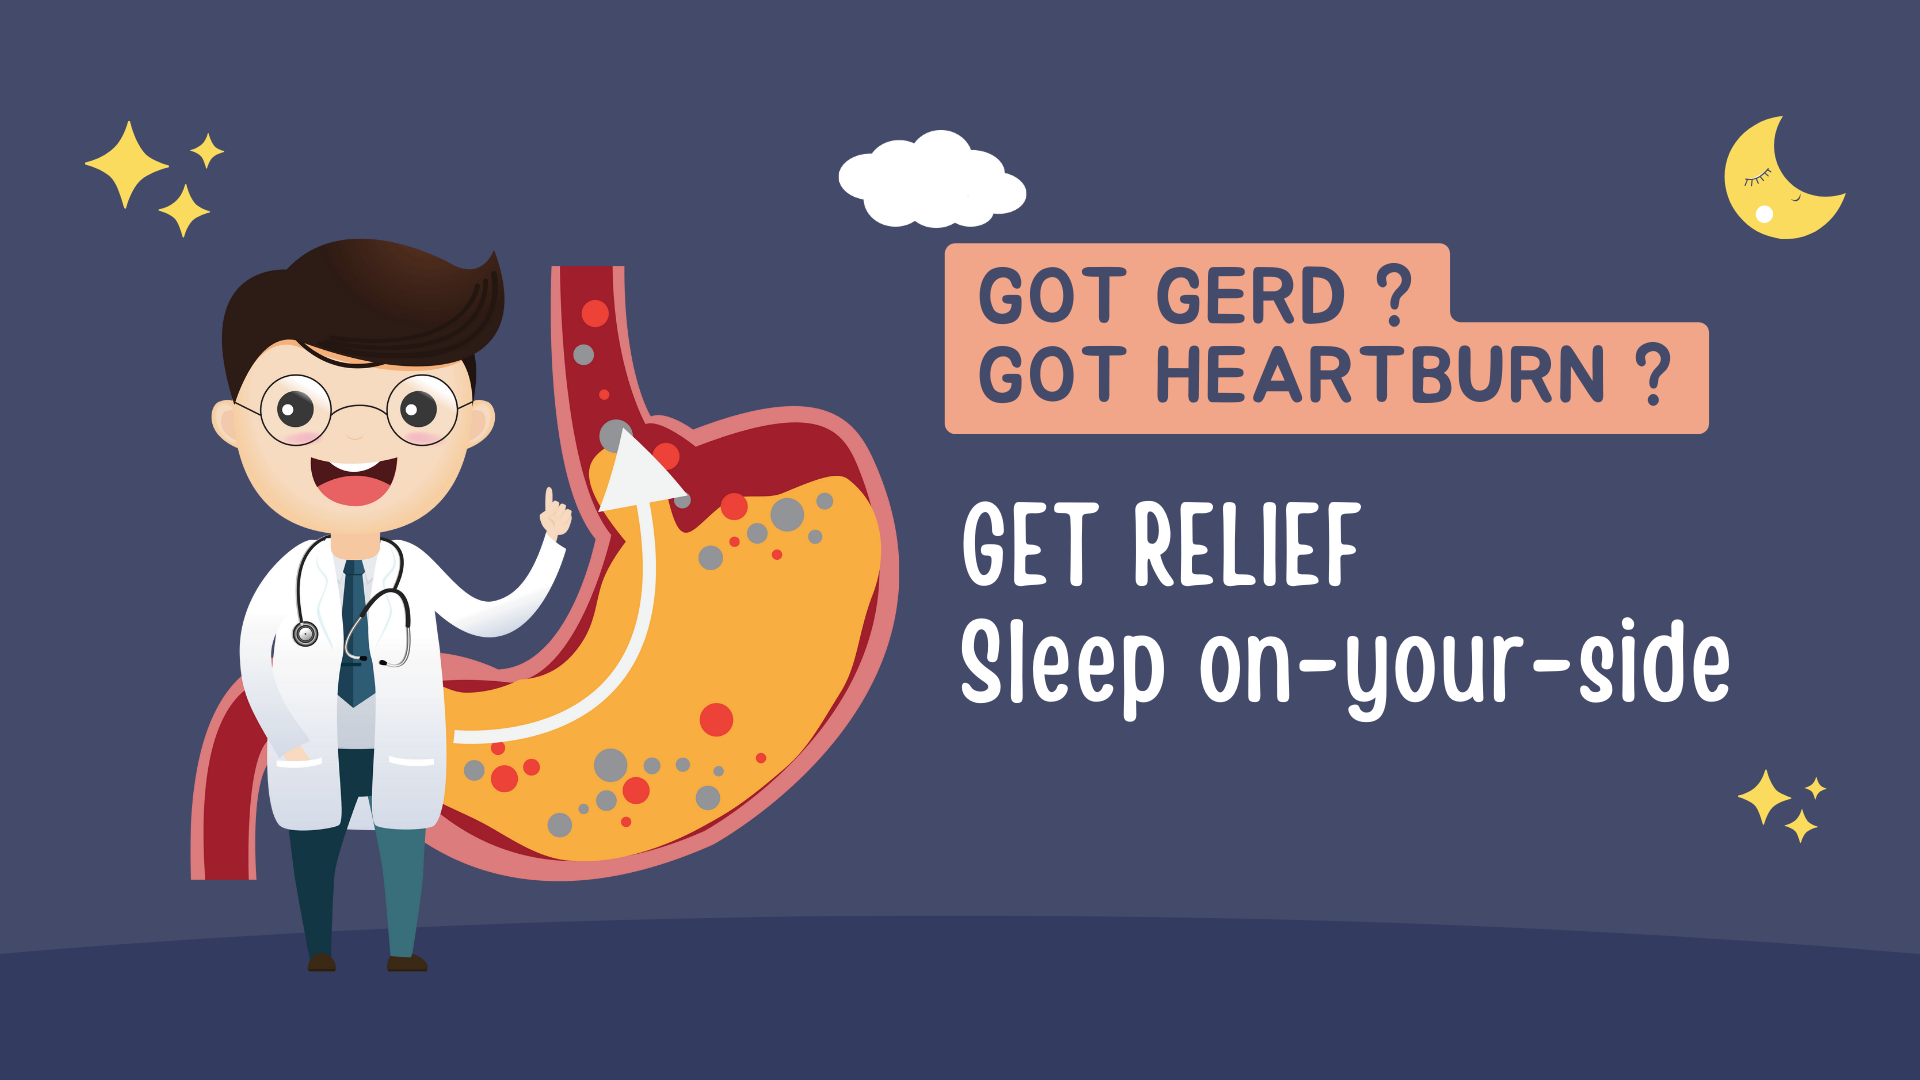 GERD (Gastroesophageal Reflux Disease) and its relation to sleep position